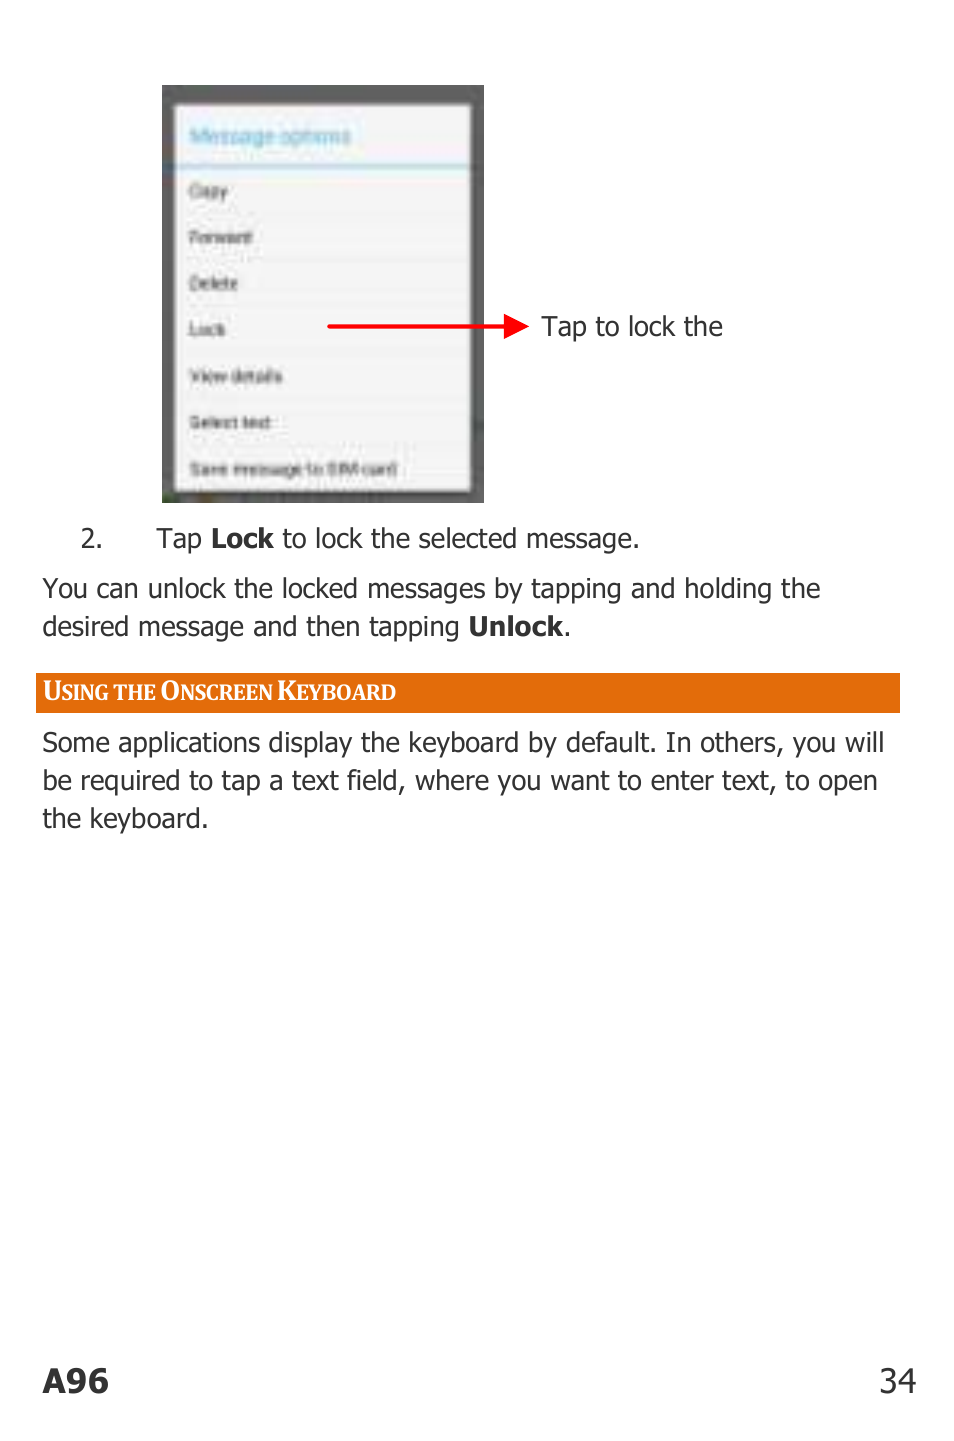 Sing the, Nscreen, Eyboard | A96 34 | Micromax Canvas Power User Manual | Page 34 / 56